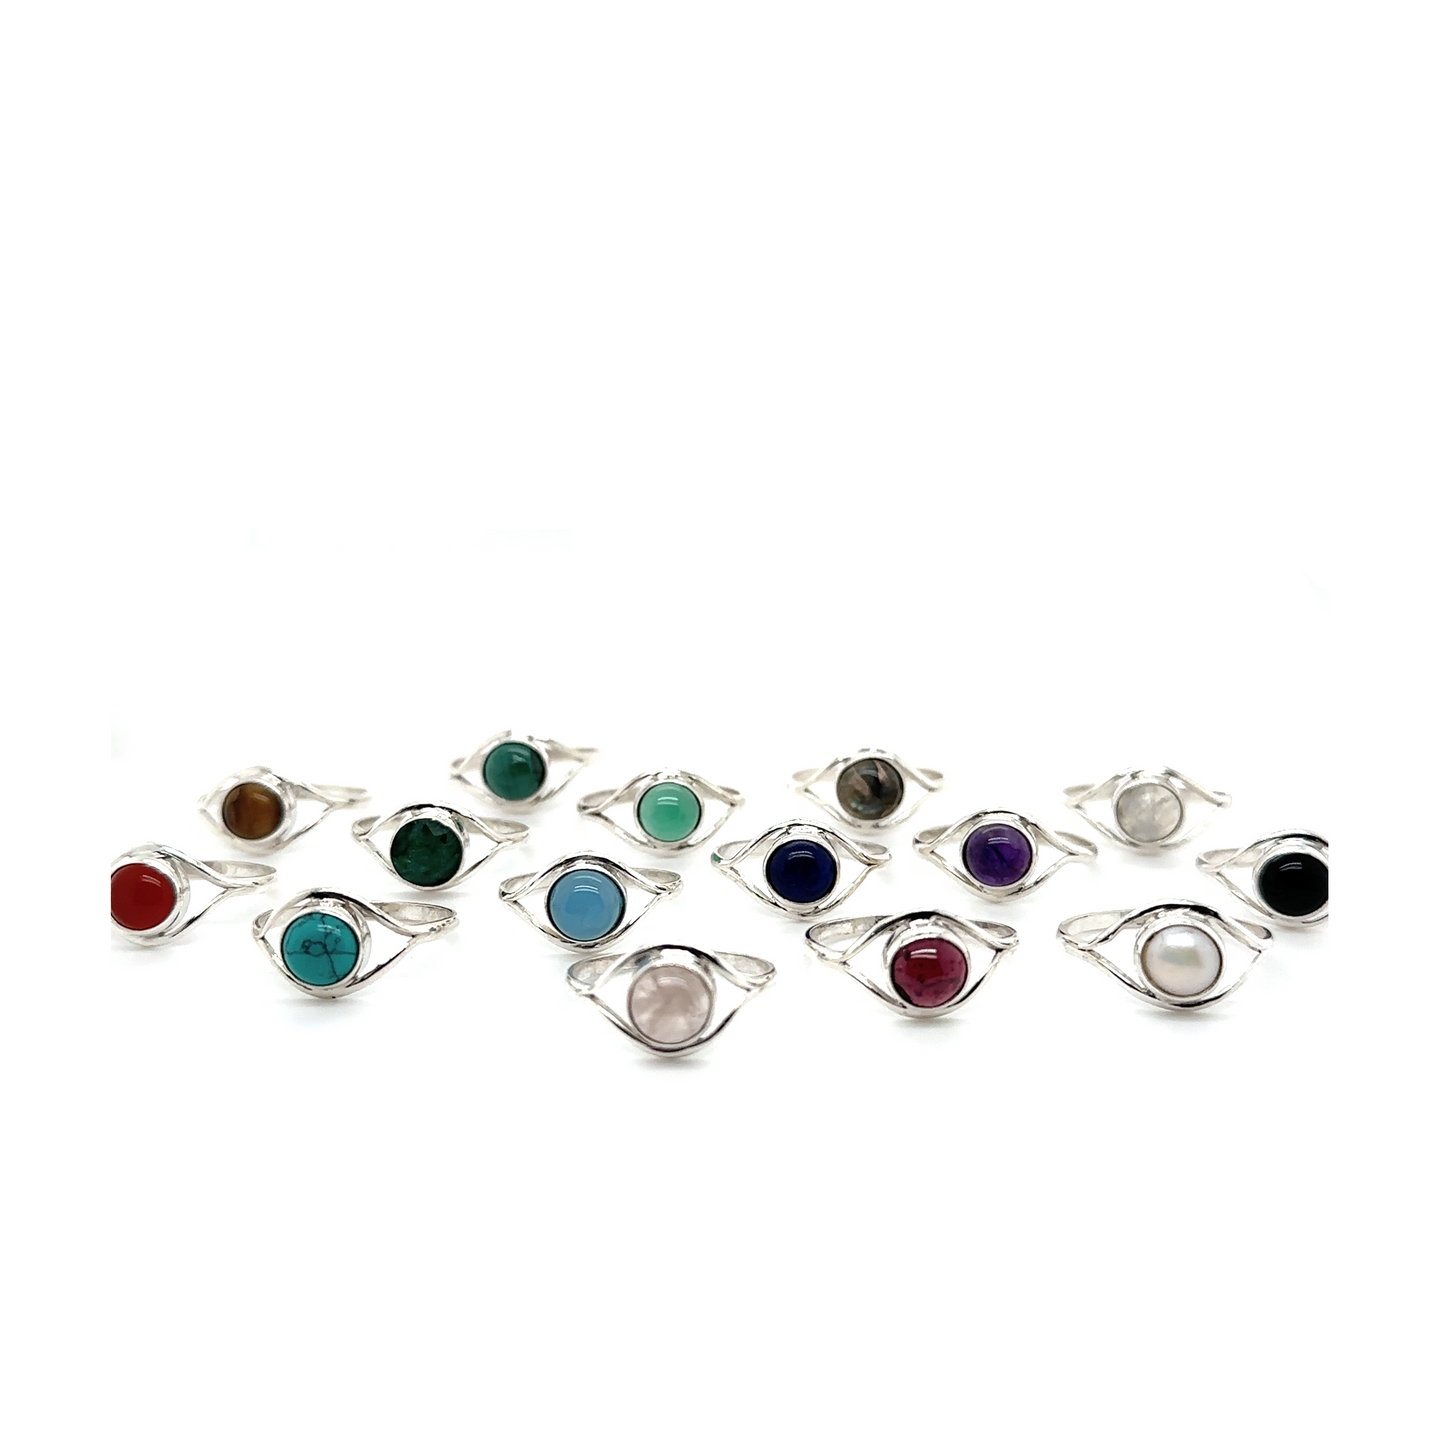 A collection of Abstract Stone Eye Rings adorned with vibrant gemstones.